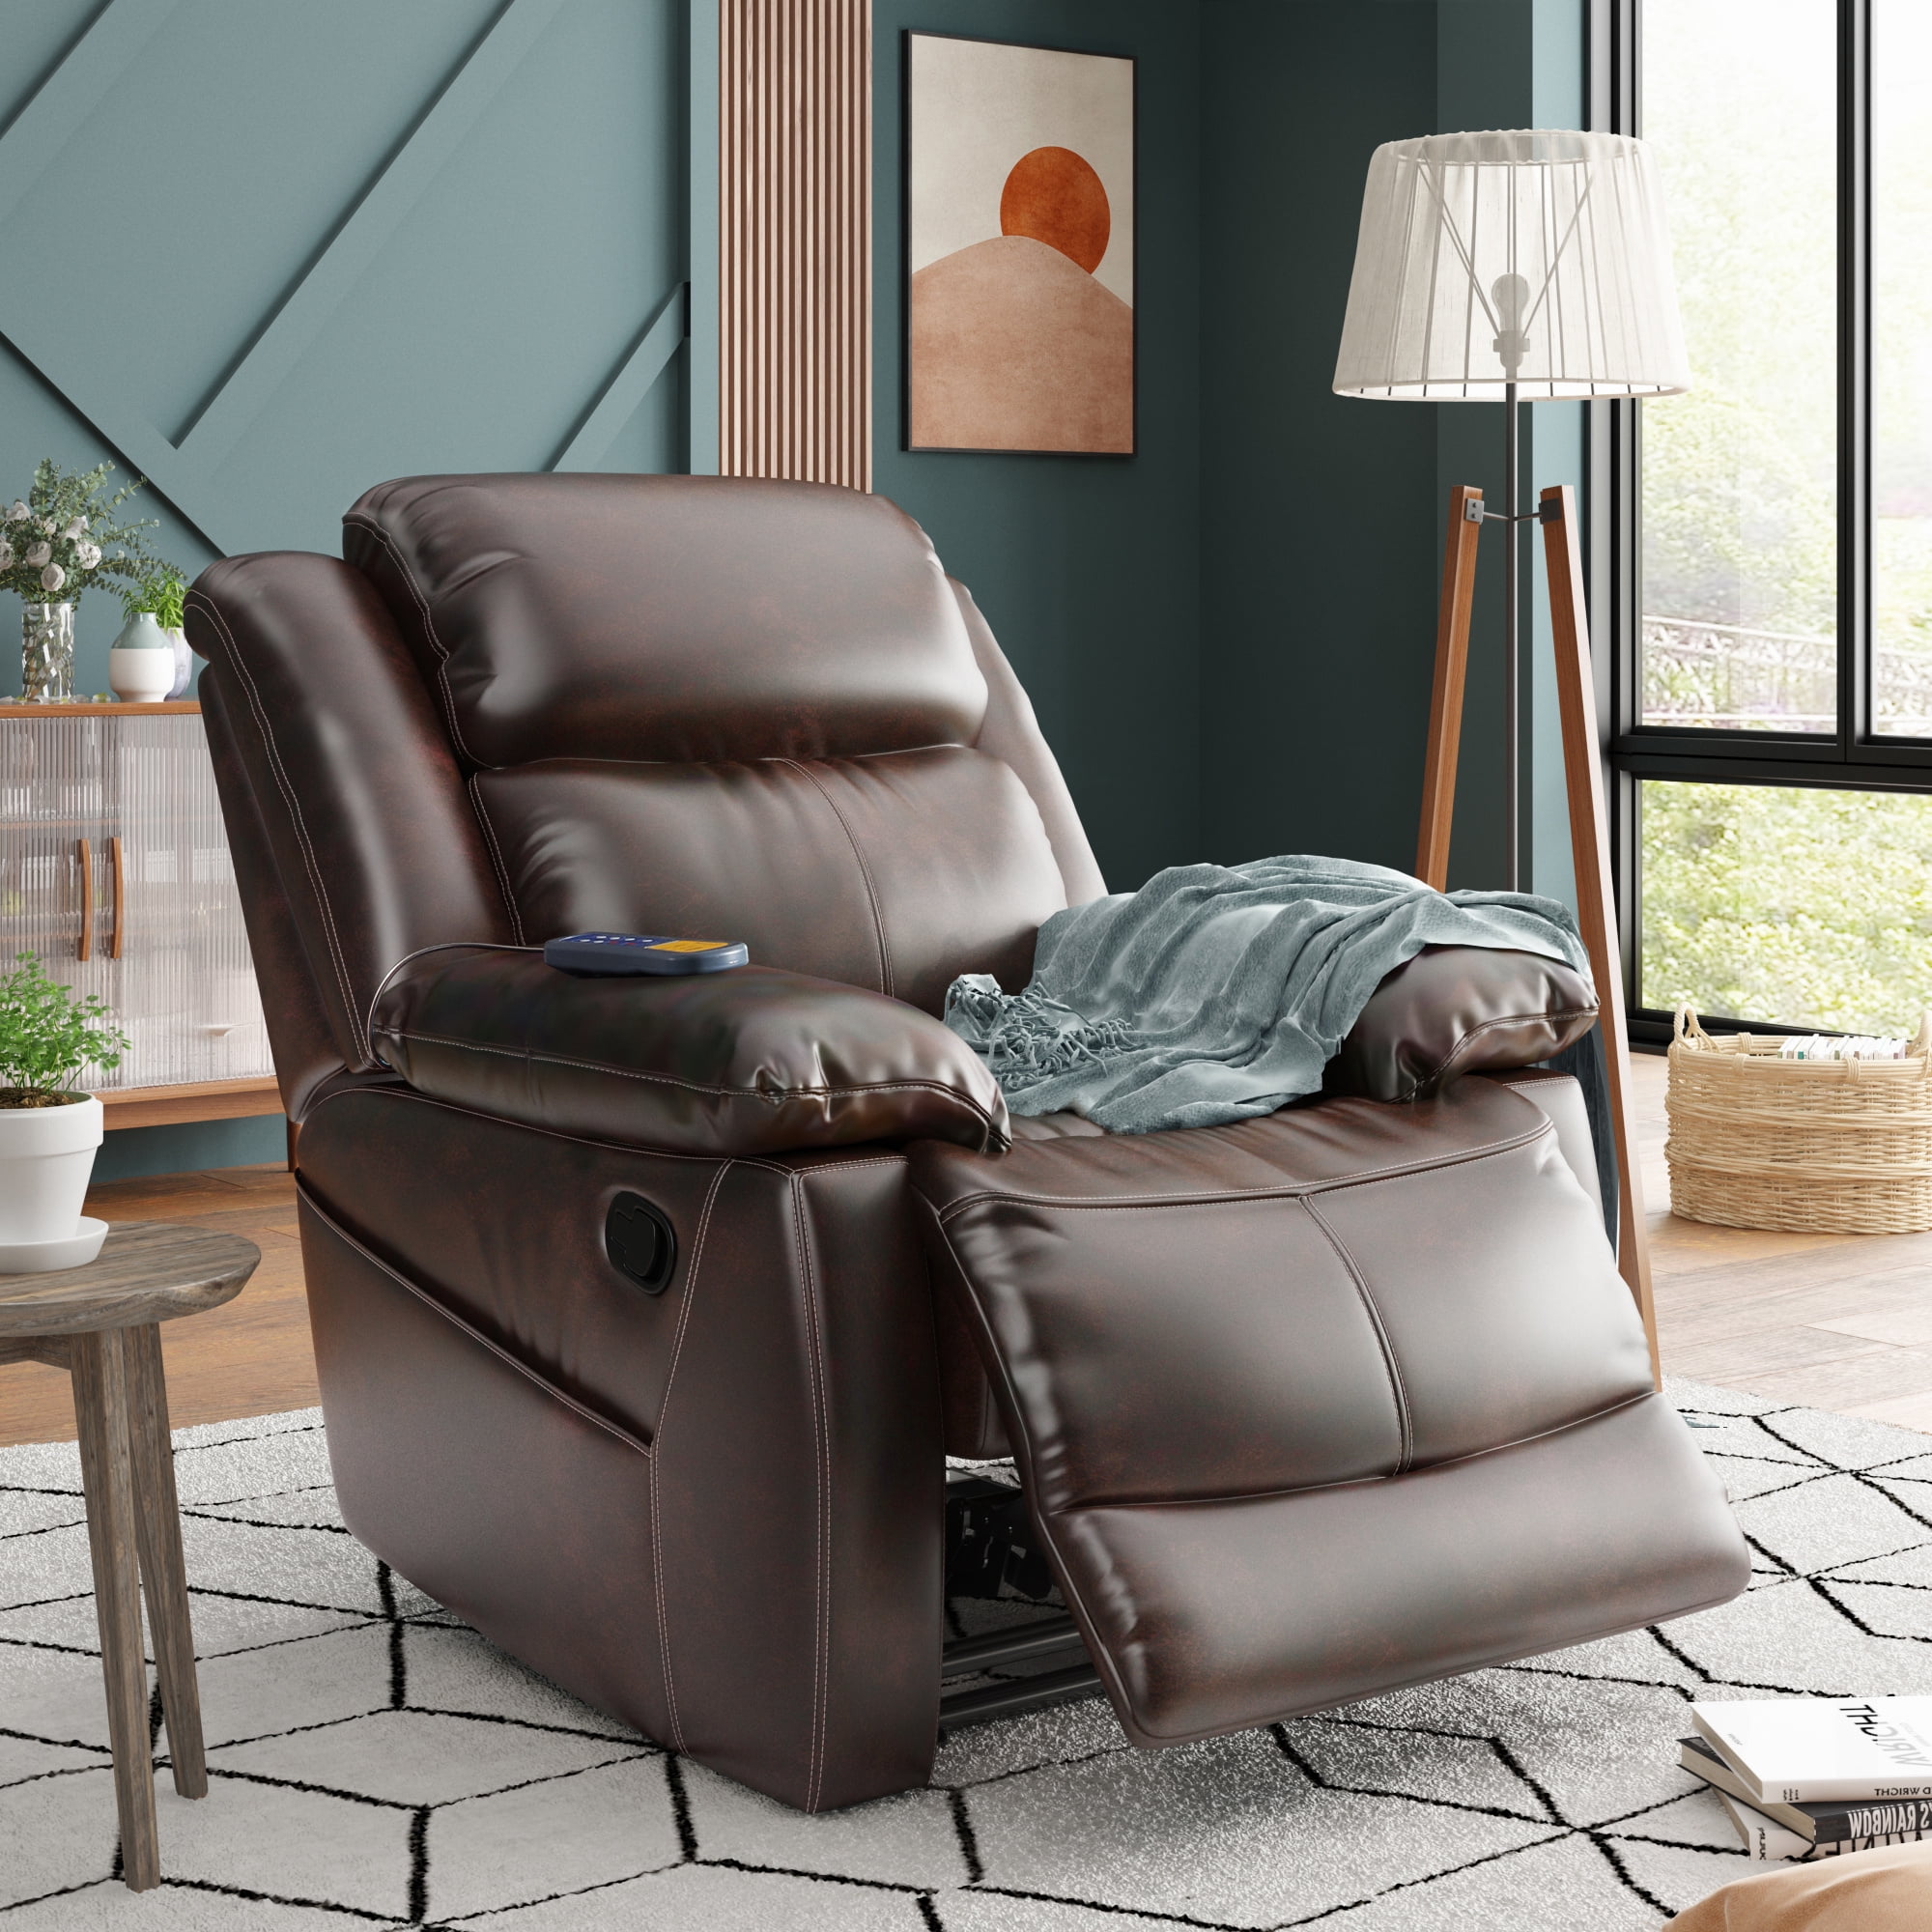 Heated Massage Leather Recliner Chair, Ergonomic Leather Recliners